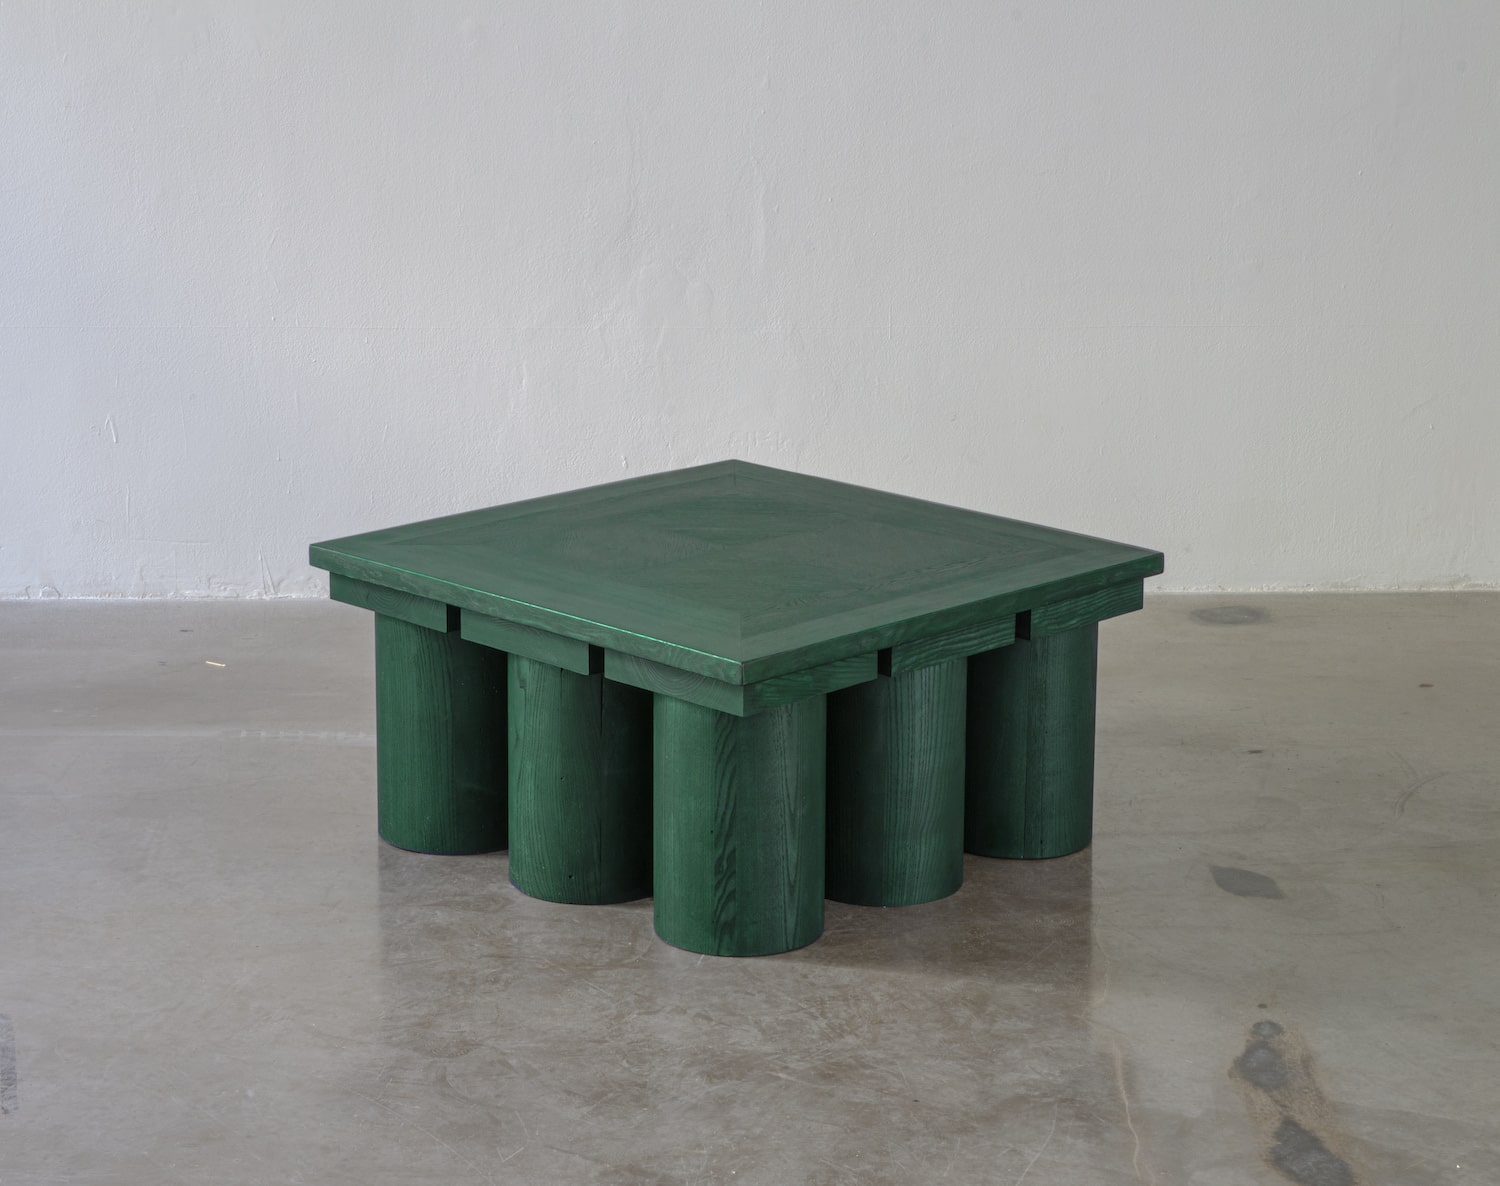 Veltrusy Mansion Low Table Inspired by Baroque and Classicist Architecture Made Out of Reclaimed Wood in Bright Green